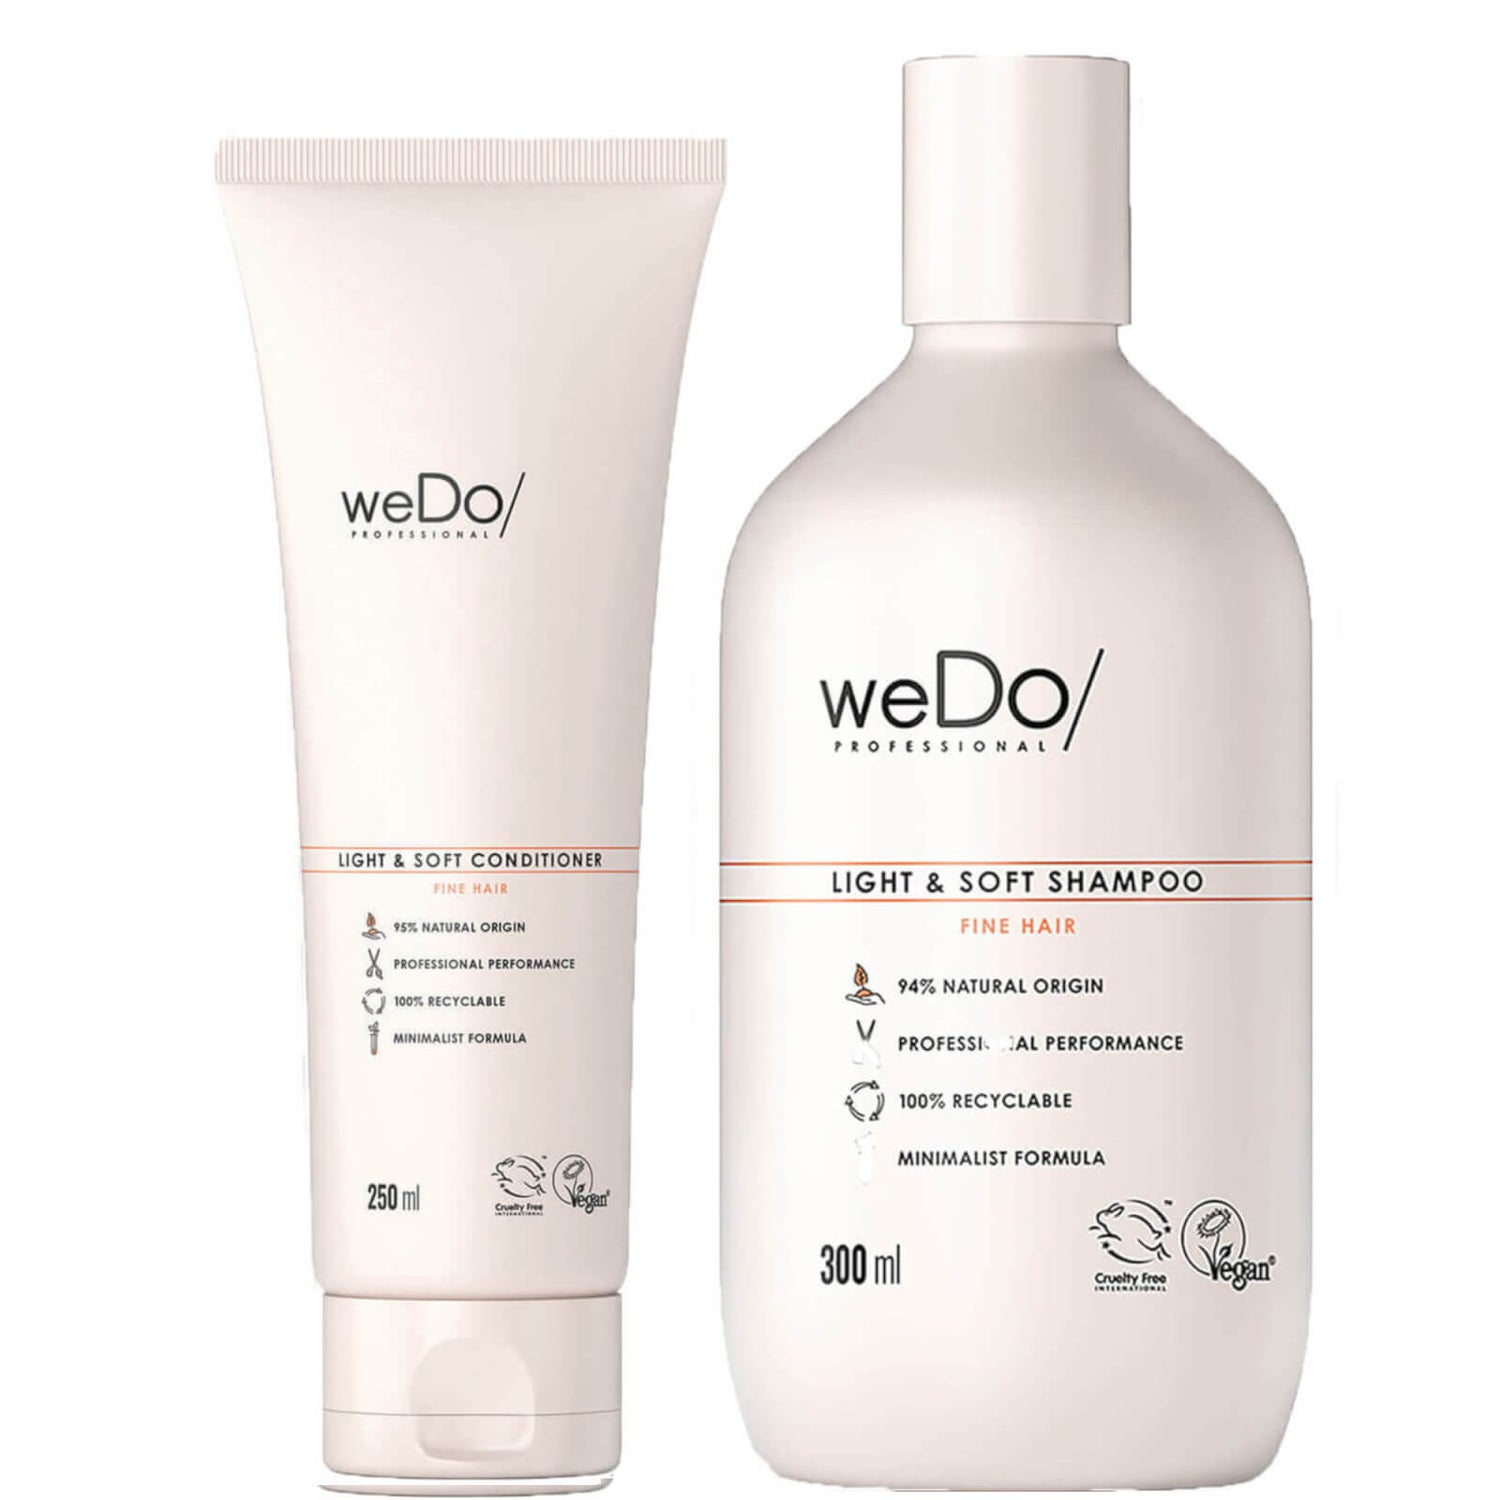 weDo/ Professional Light and Soft Shampoo and Conditioner Full Size Regime Bundle